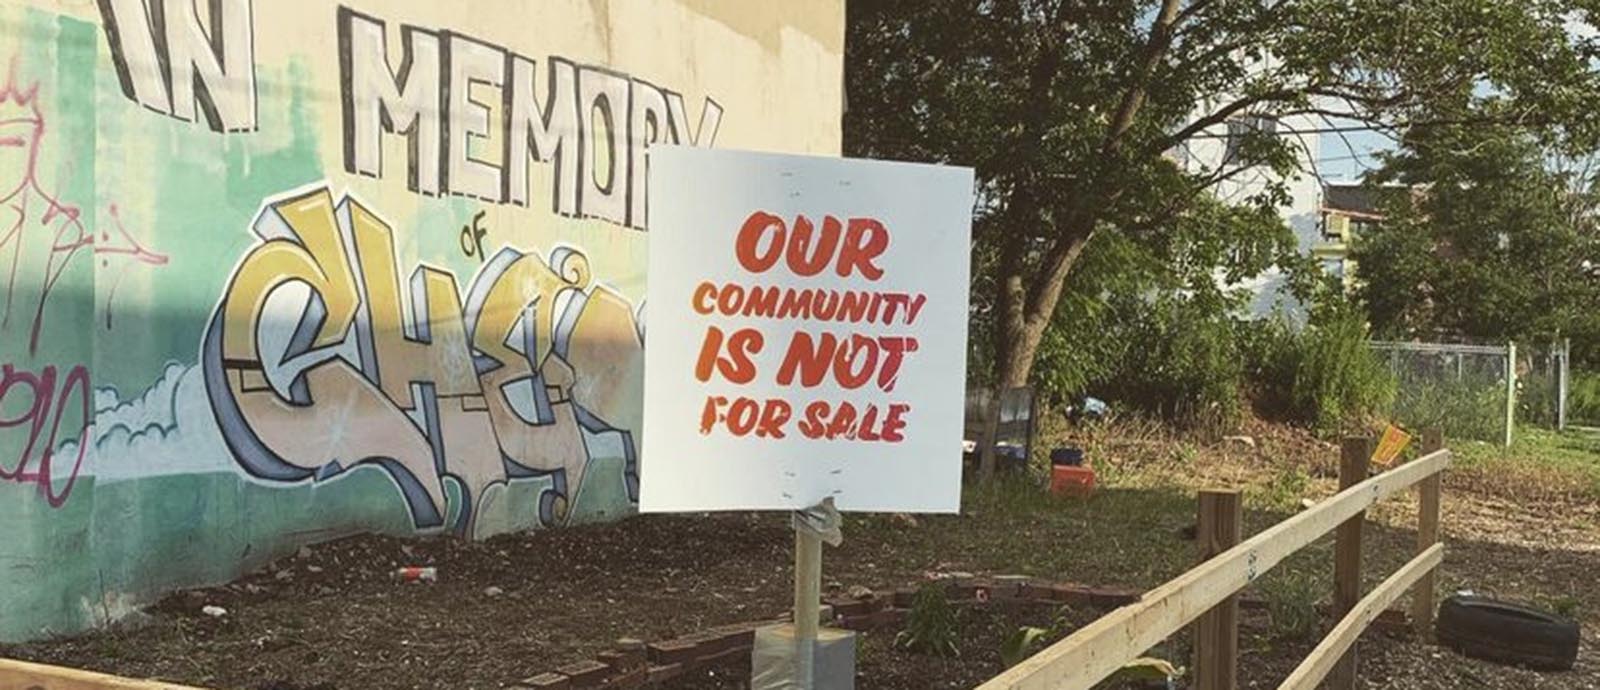 A sign at an urban garden reminds viewers who owns the community